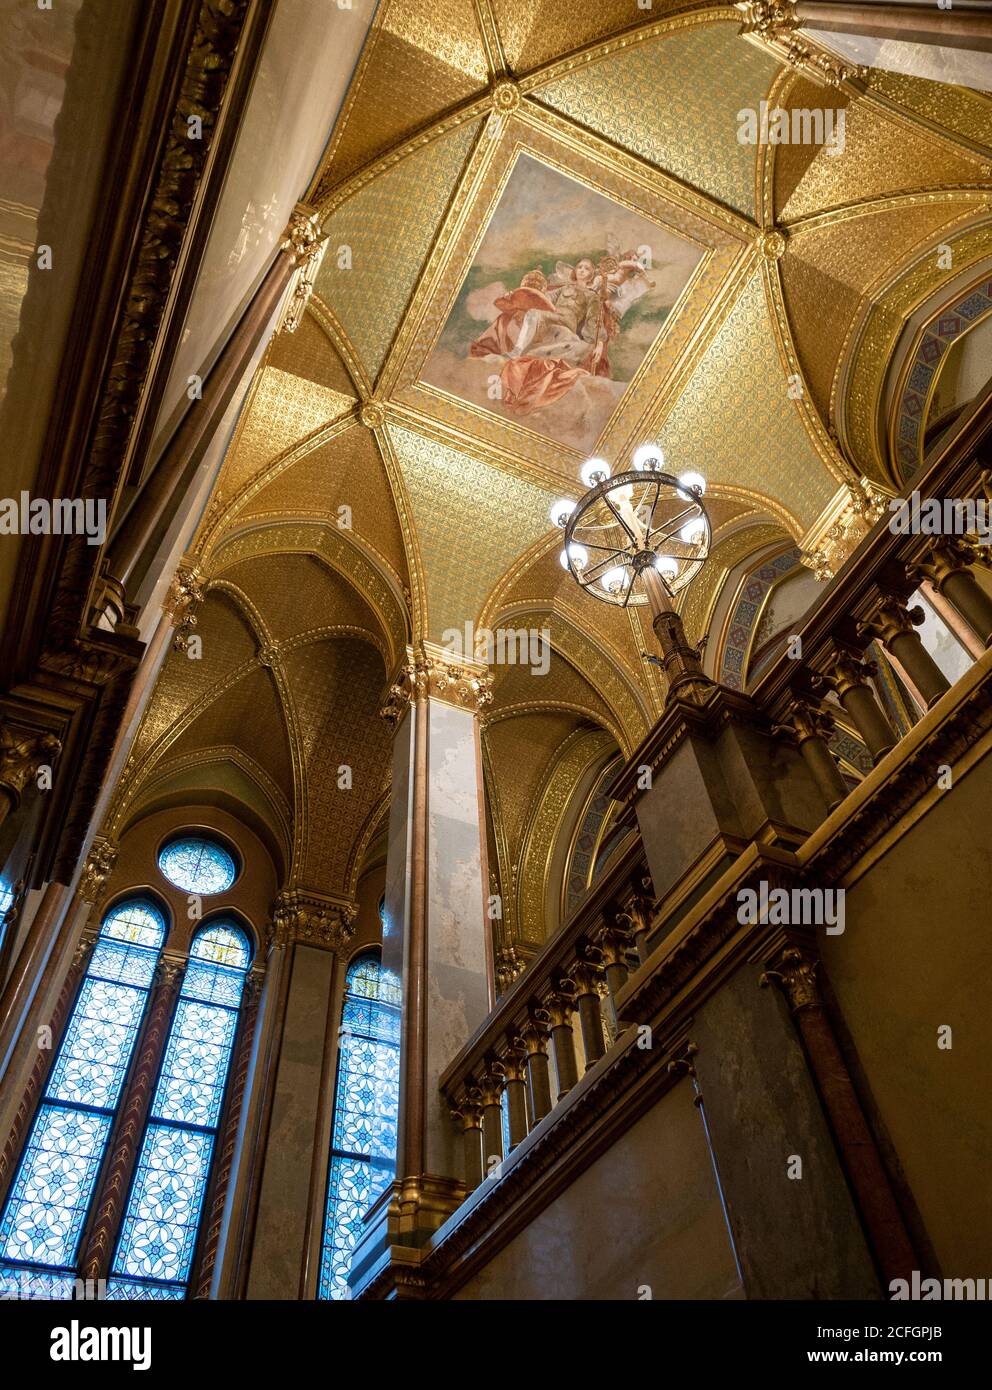 Opulent Parliamentary Ceiling: A golden candelabara lights the ceiling painting framed by gold leaf work in a stairwell of the Hungarian Parliament building. Stock Photo